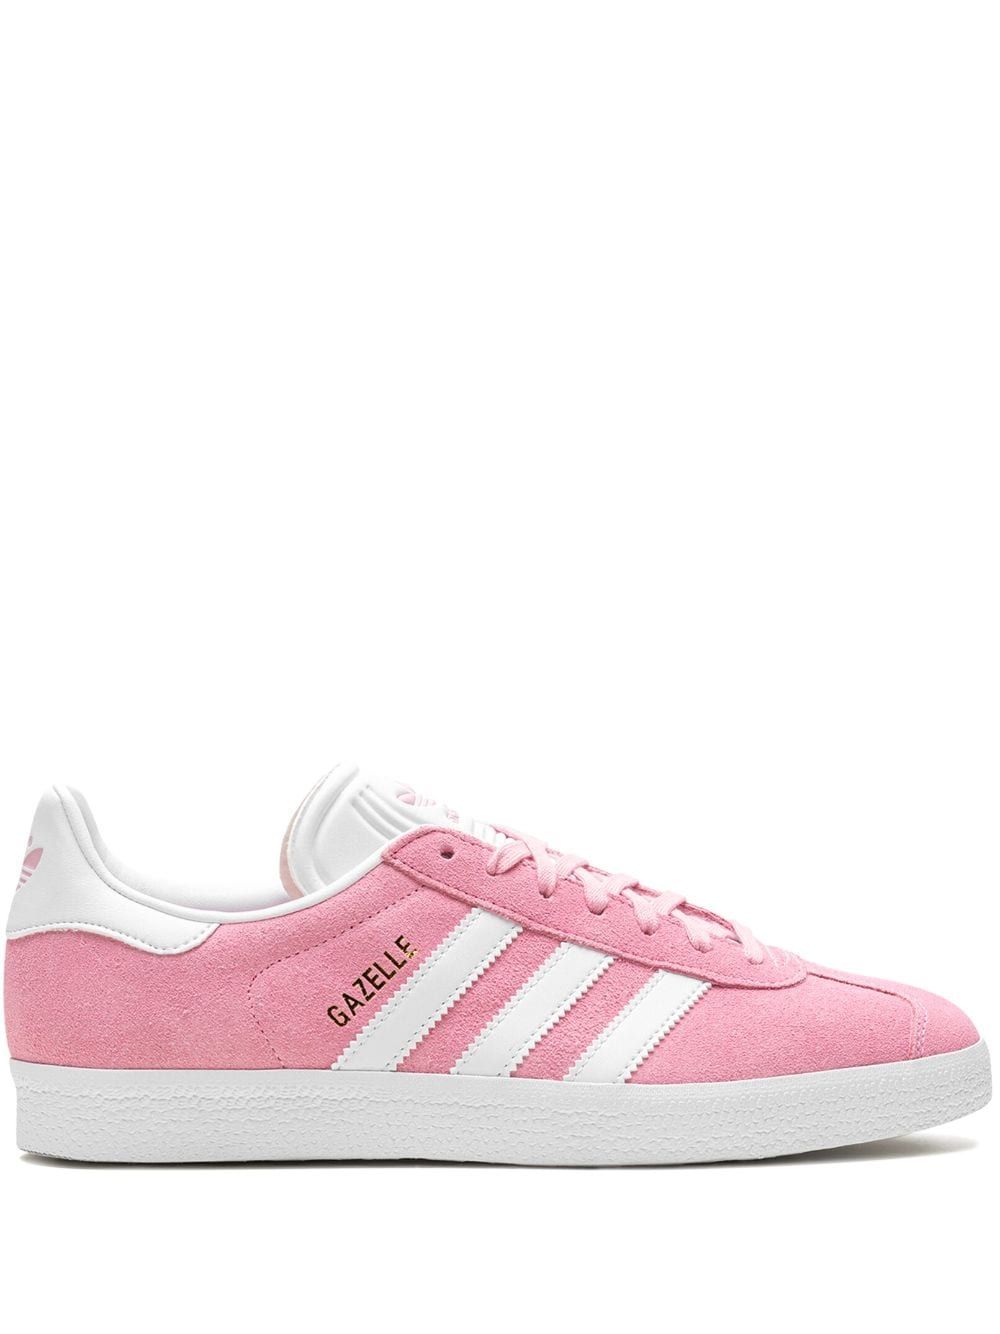 The DetailsadidasGazelle "Pink Glow" sneakersAdidas' iconic Gazelle sneakers have remained a main... | Farfetch Global